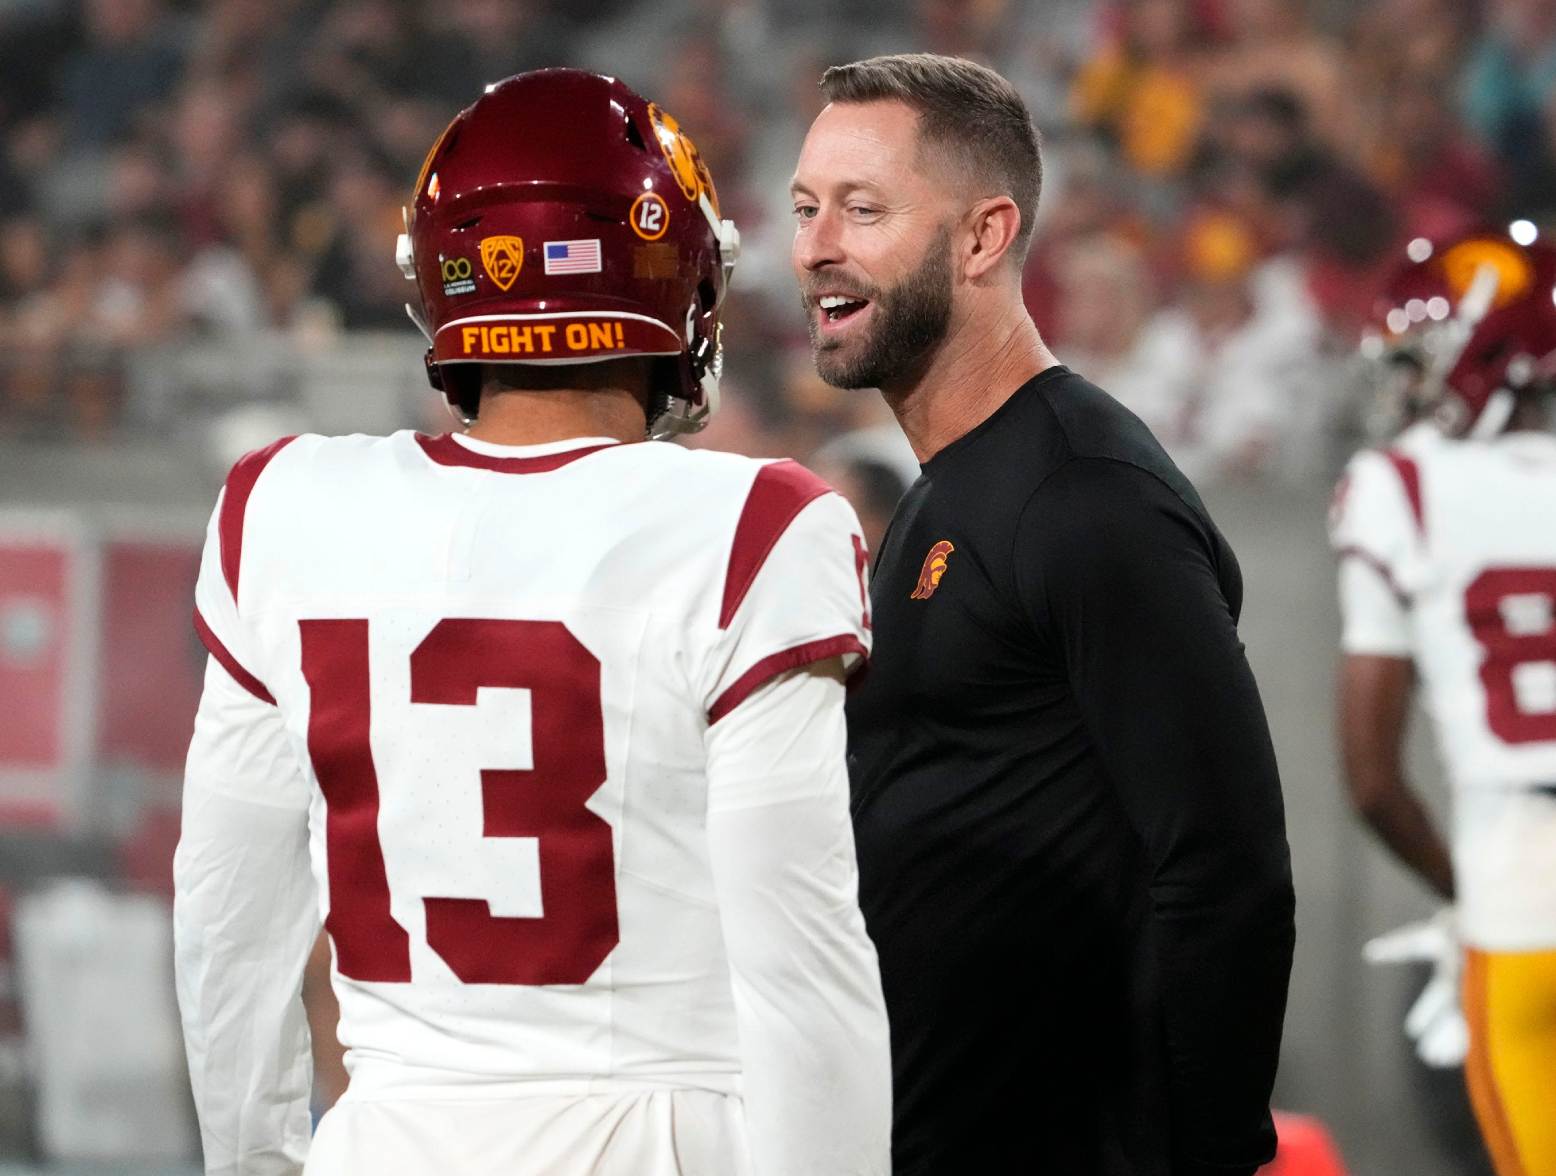 The former Arizona Cardinals head coach and now USC Trojans assistant coach Kliff Kingsbury talks to quarterback Caleb Williams (13) during the pregame warmup before playing the Arizona State Sun Devils at Mountain America Stadium in Tempe on Sept. 23, 2023. (Rob Schumacher/The Republic/USA Today Network)